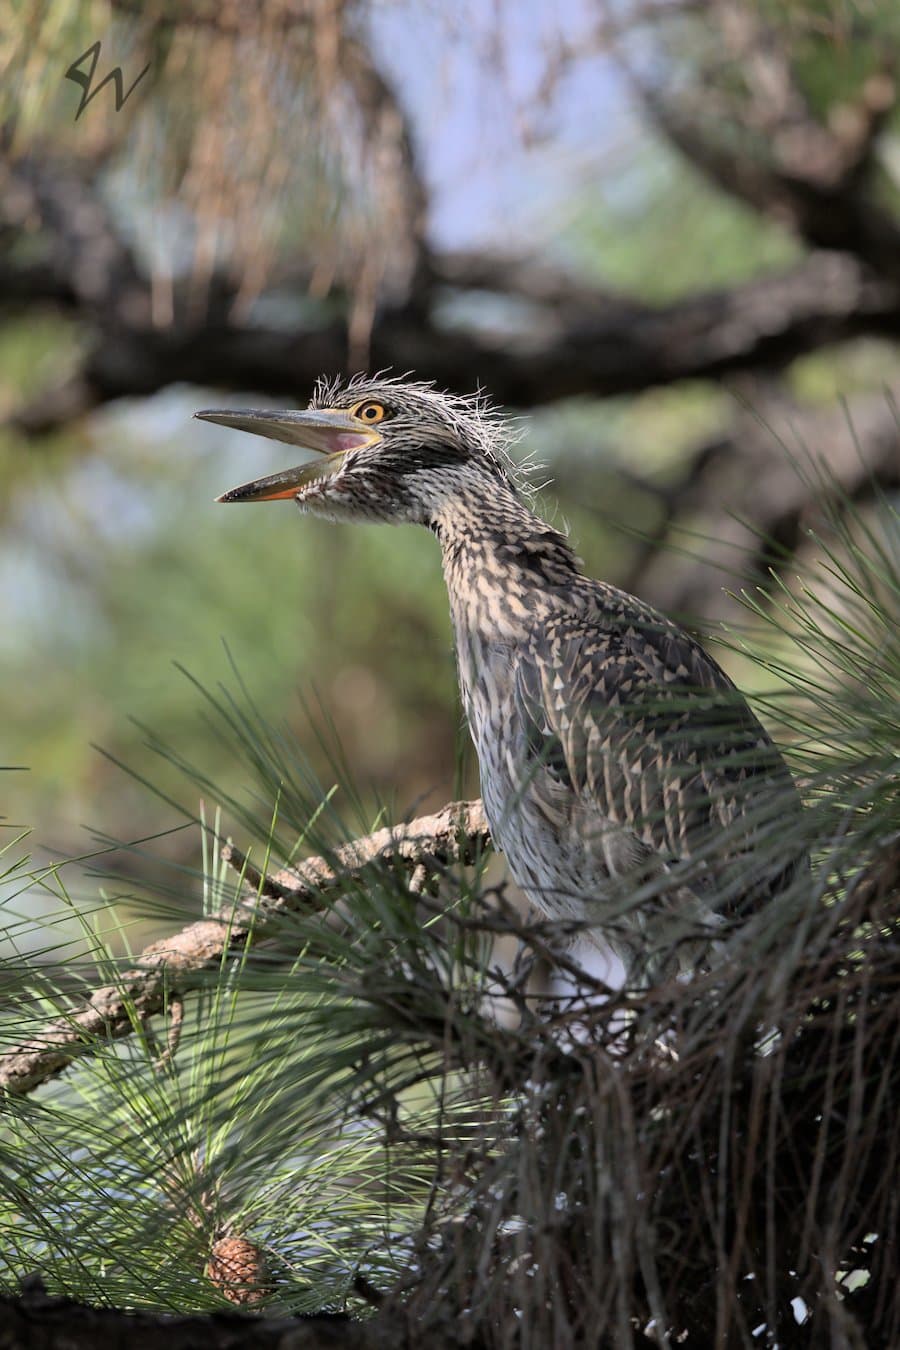 Yellow-crowned Night Heron chick squawks in nest.